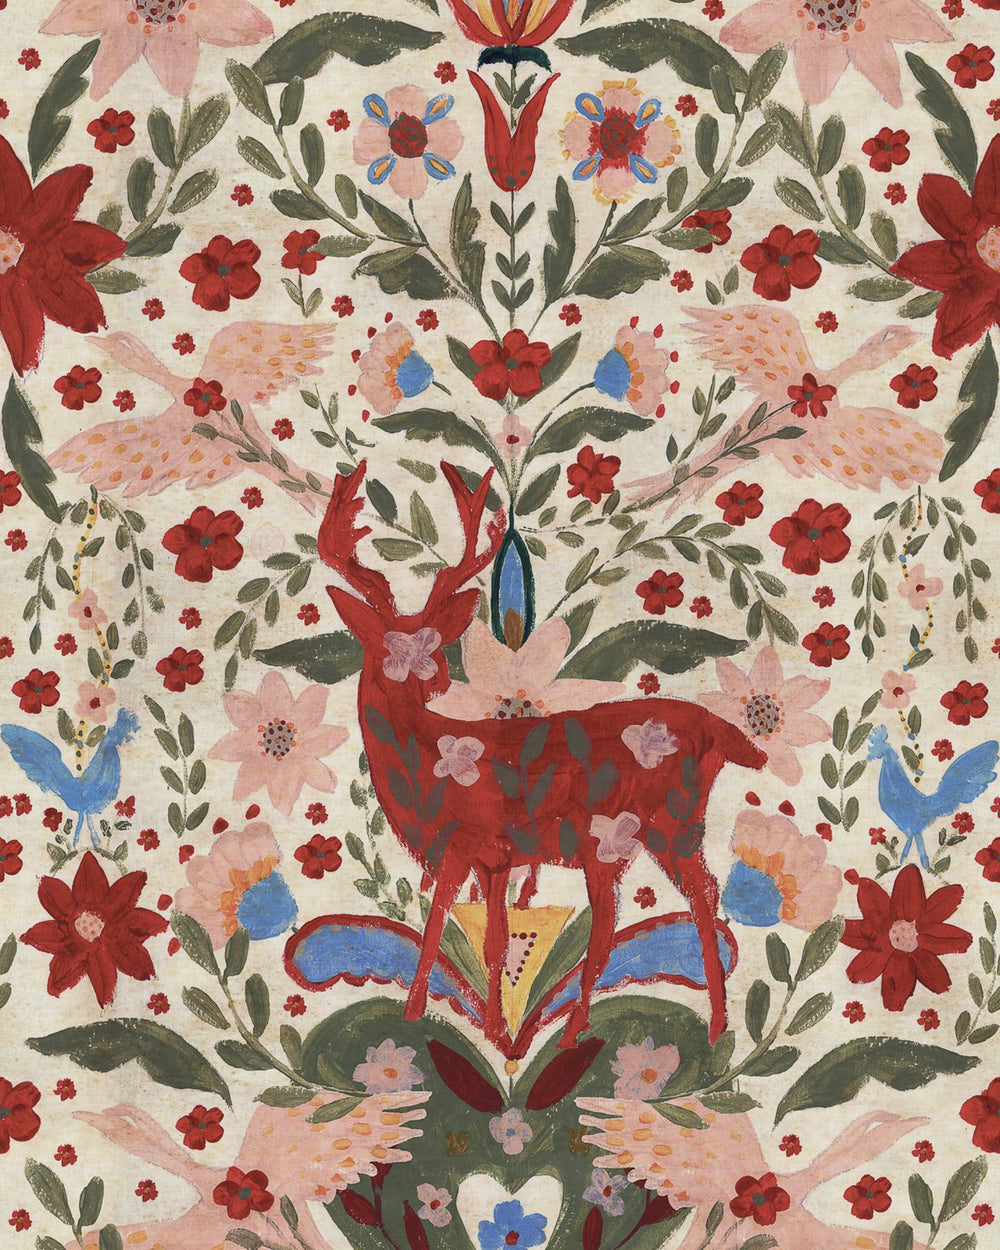 Mind-the-gap-Tyrol-collection-wallpaper-Der-Konig-alpine-print-hand-painted-filk-inspired-print-stags-floral-birds-white-red-woodland-paper